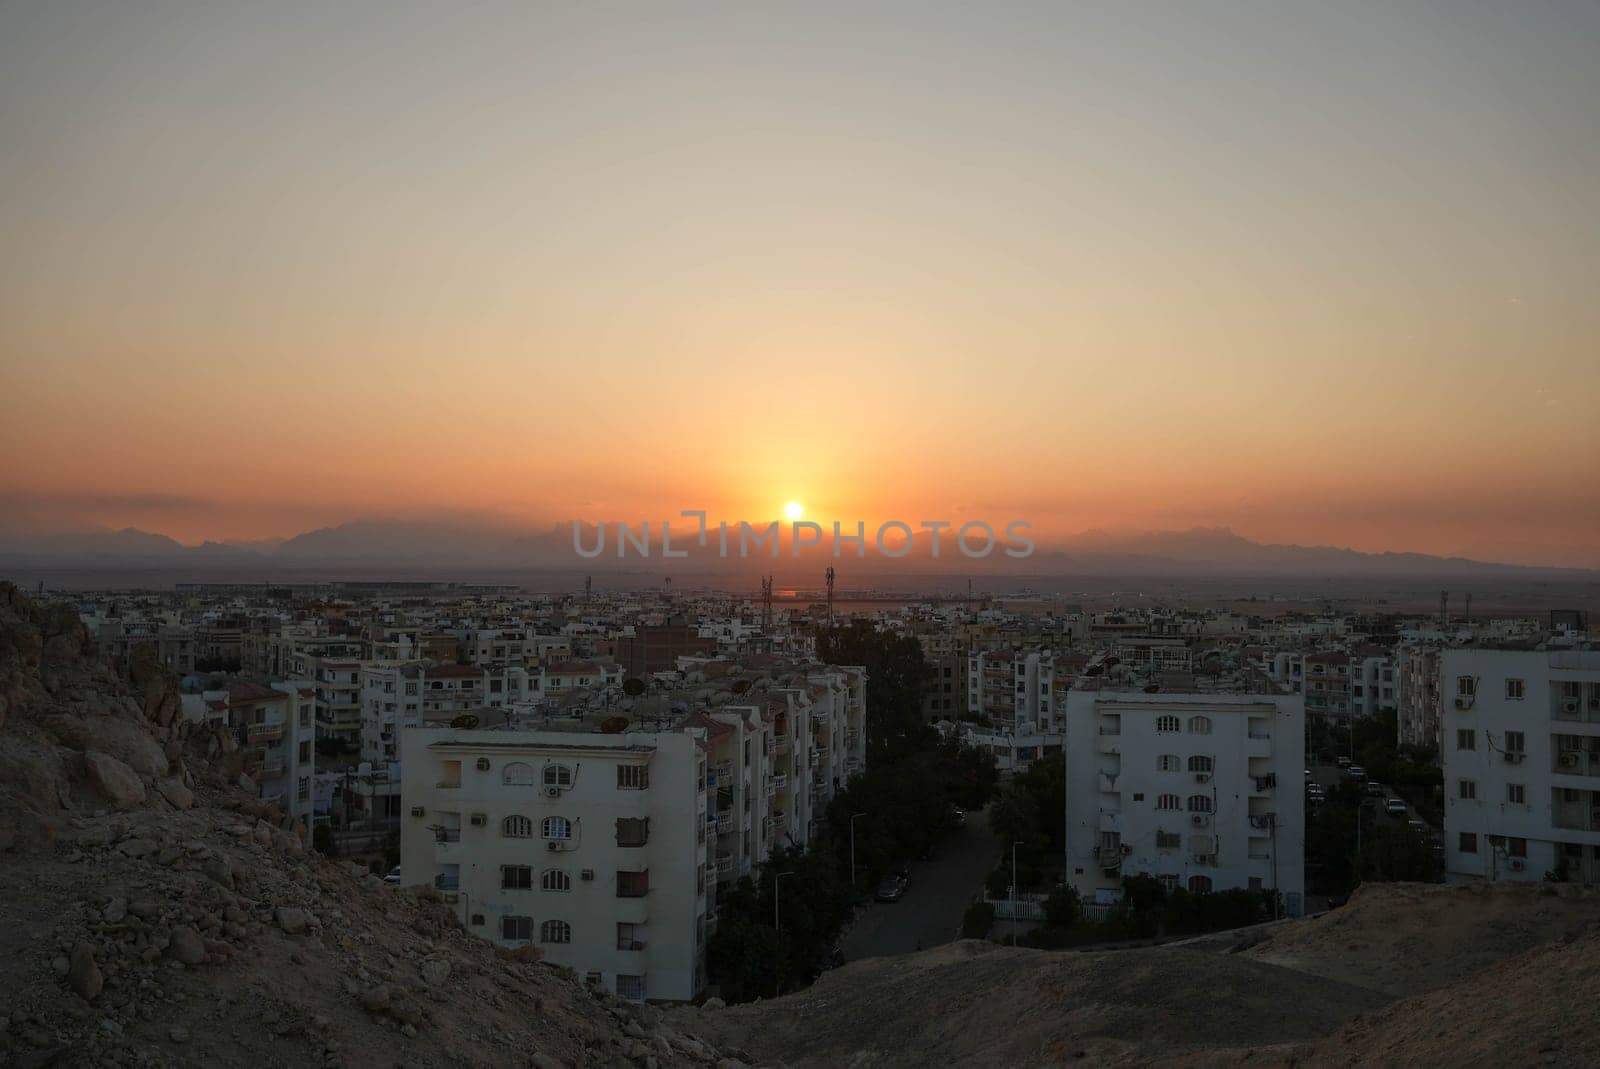 Sunset looking over an african city near the desert in Egypt. High quality photo